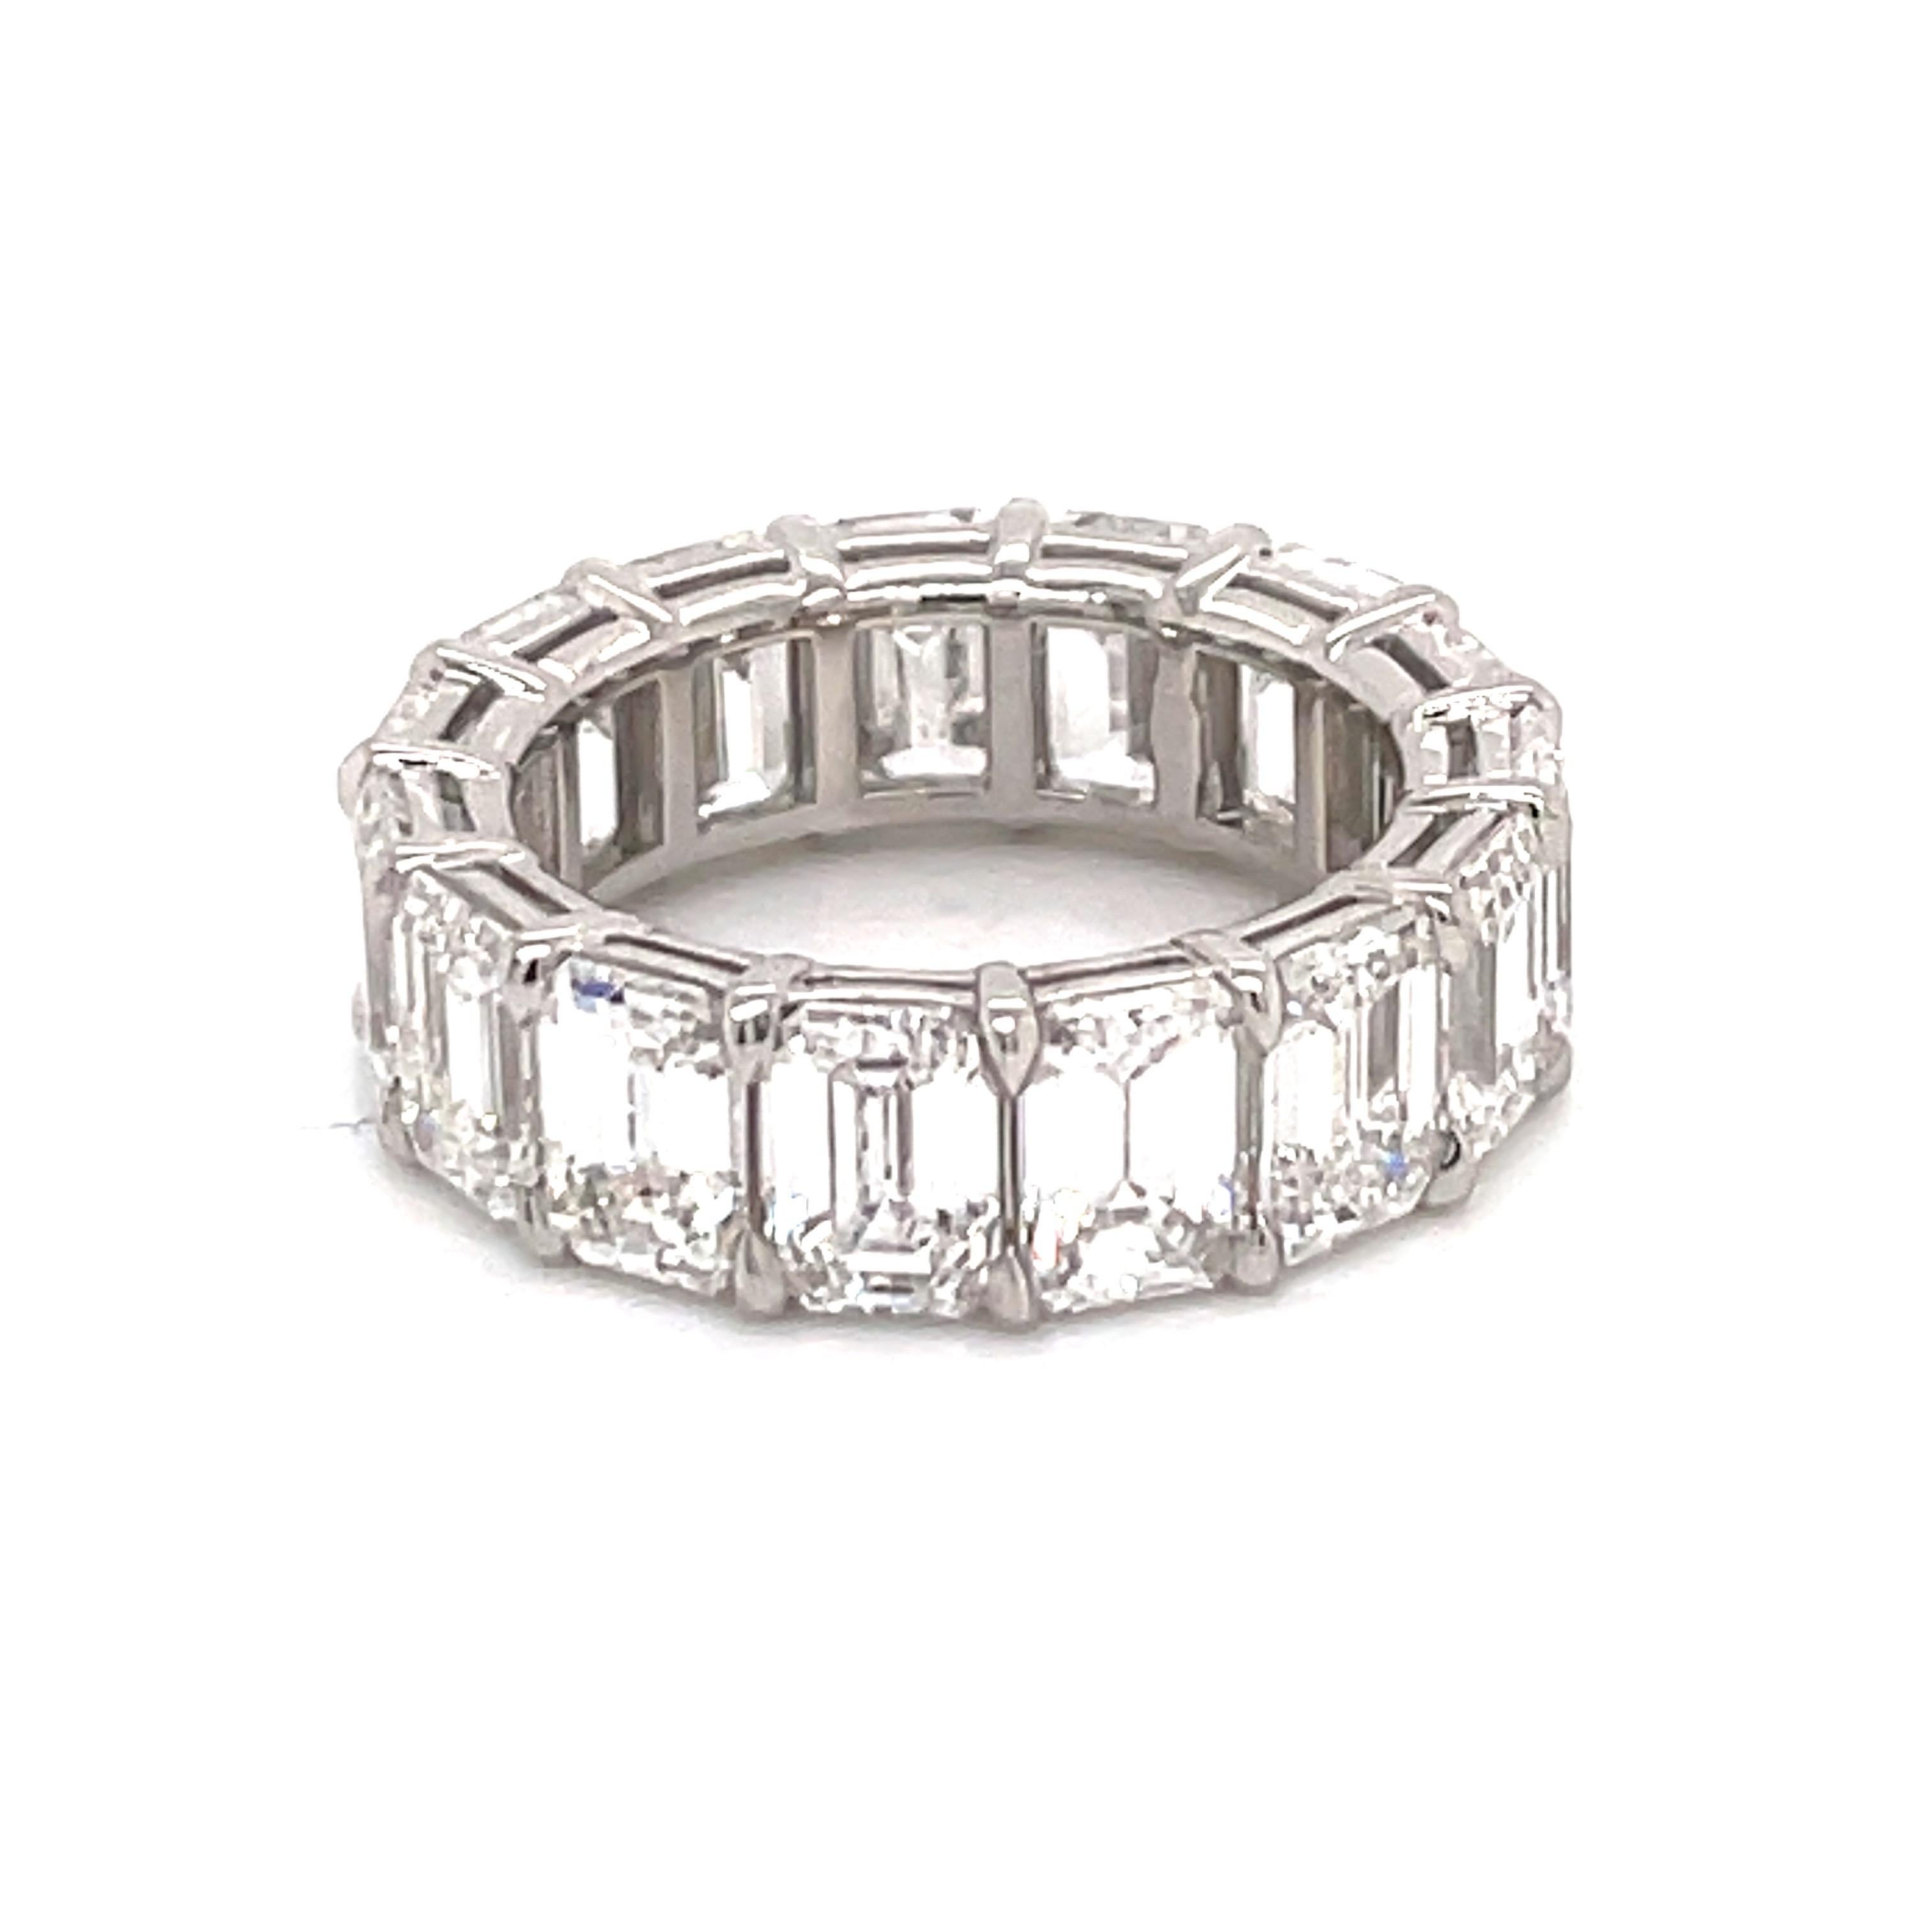 Contemporary All GIA Certified Emerald Cut Diamond Eternity Ring 10.65 CT D-F IF-VS2 Platinum